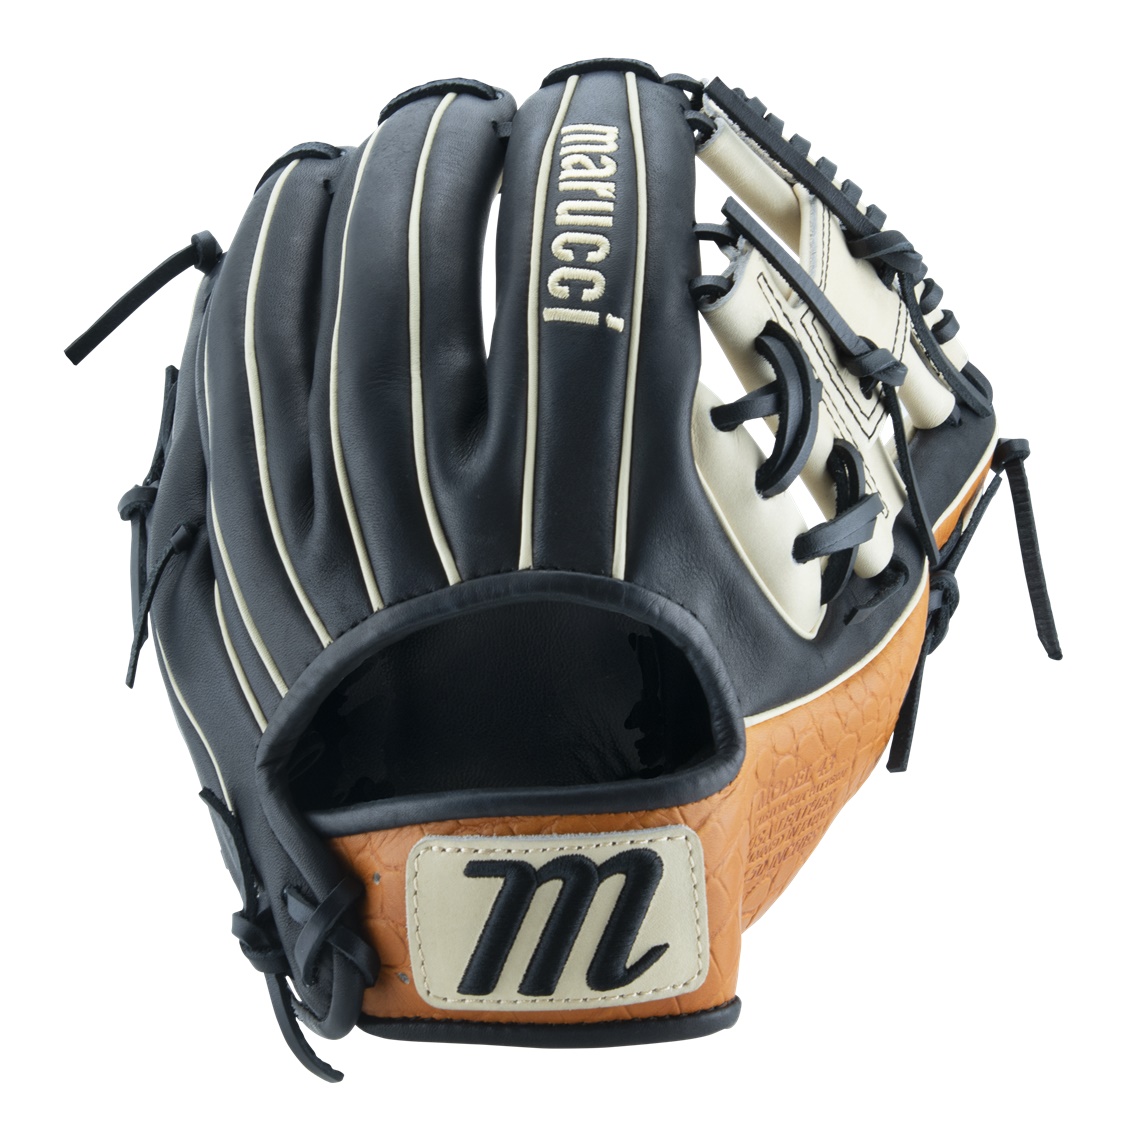 marucci-capitol-series-2024-m-type-42a2-11-50-baseball-glove-i-web-right-hand-throw-black-gator-tan MFG2CP42A2-BKGT-RightHandThrow Marucci  The Marucci Capitol line of baseball gloves is a top-of-the-line series